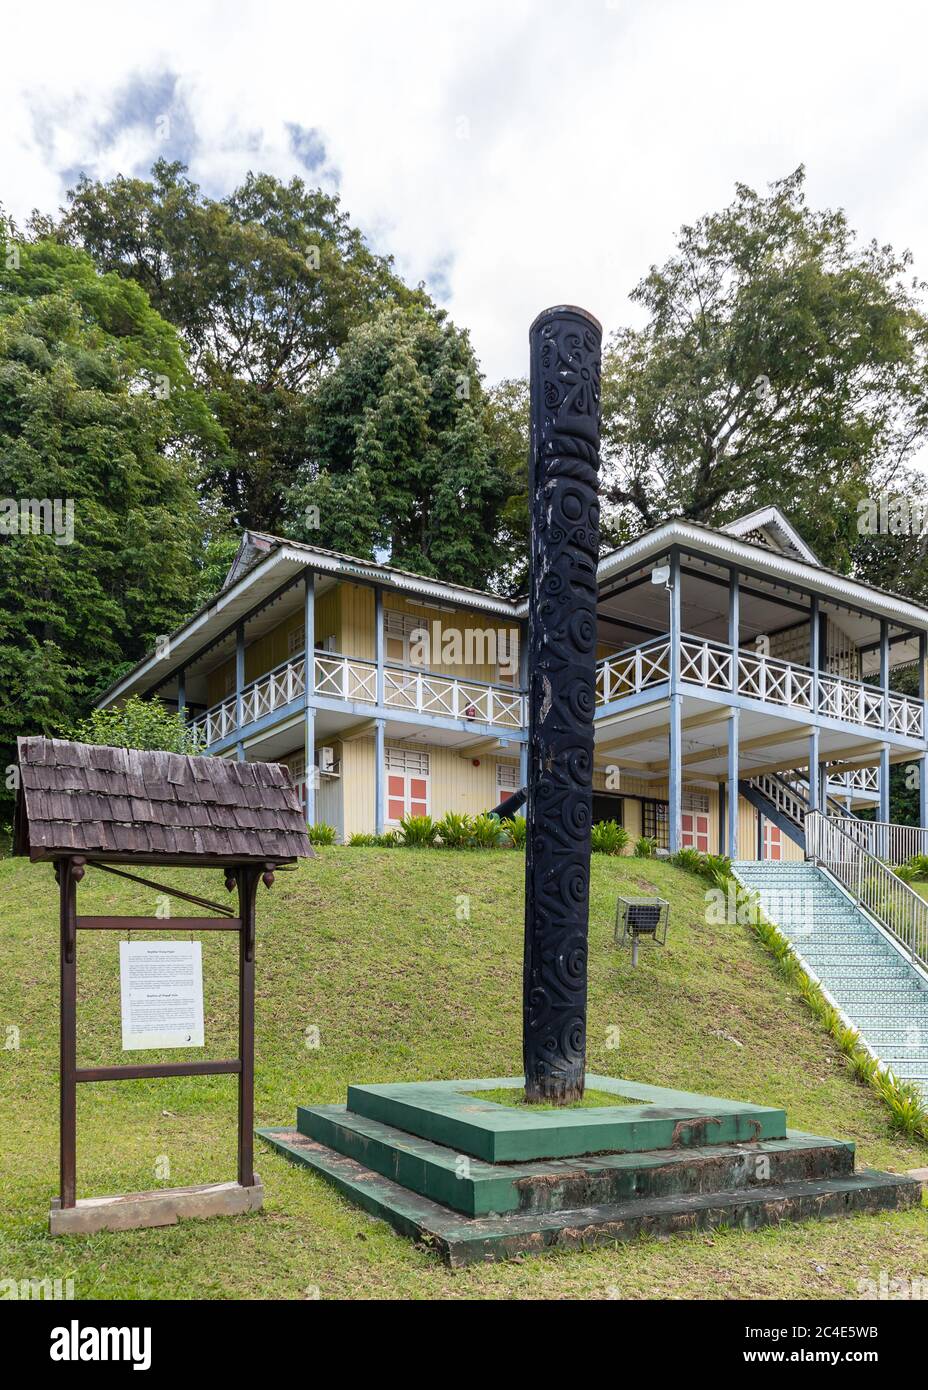 Limbang, Sarawak, Malaysia: Replica of the carved 'Pagul Pole' with gibbon motif in front of 'Limbang Regional Museum' Stock Photo